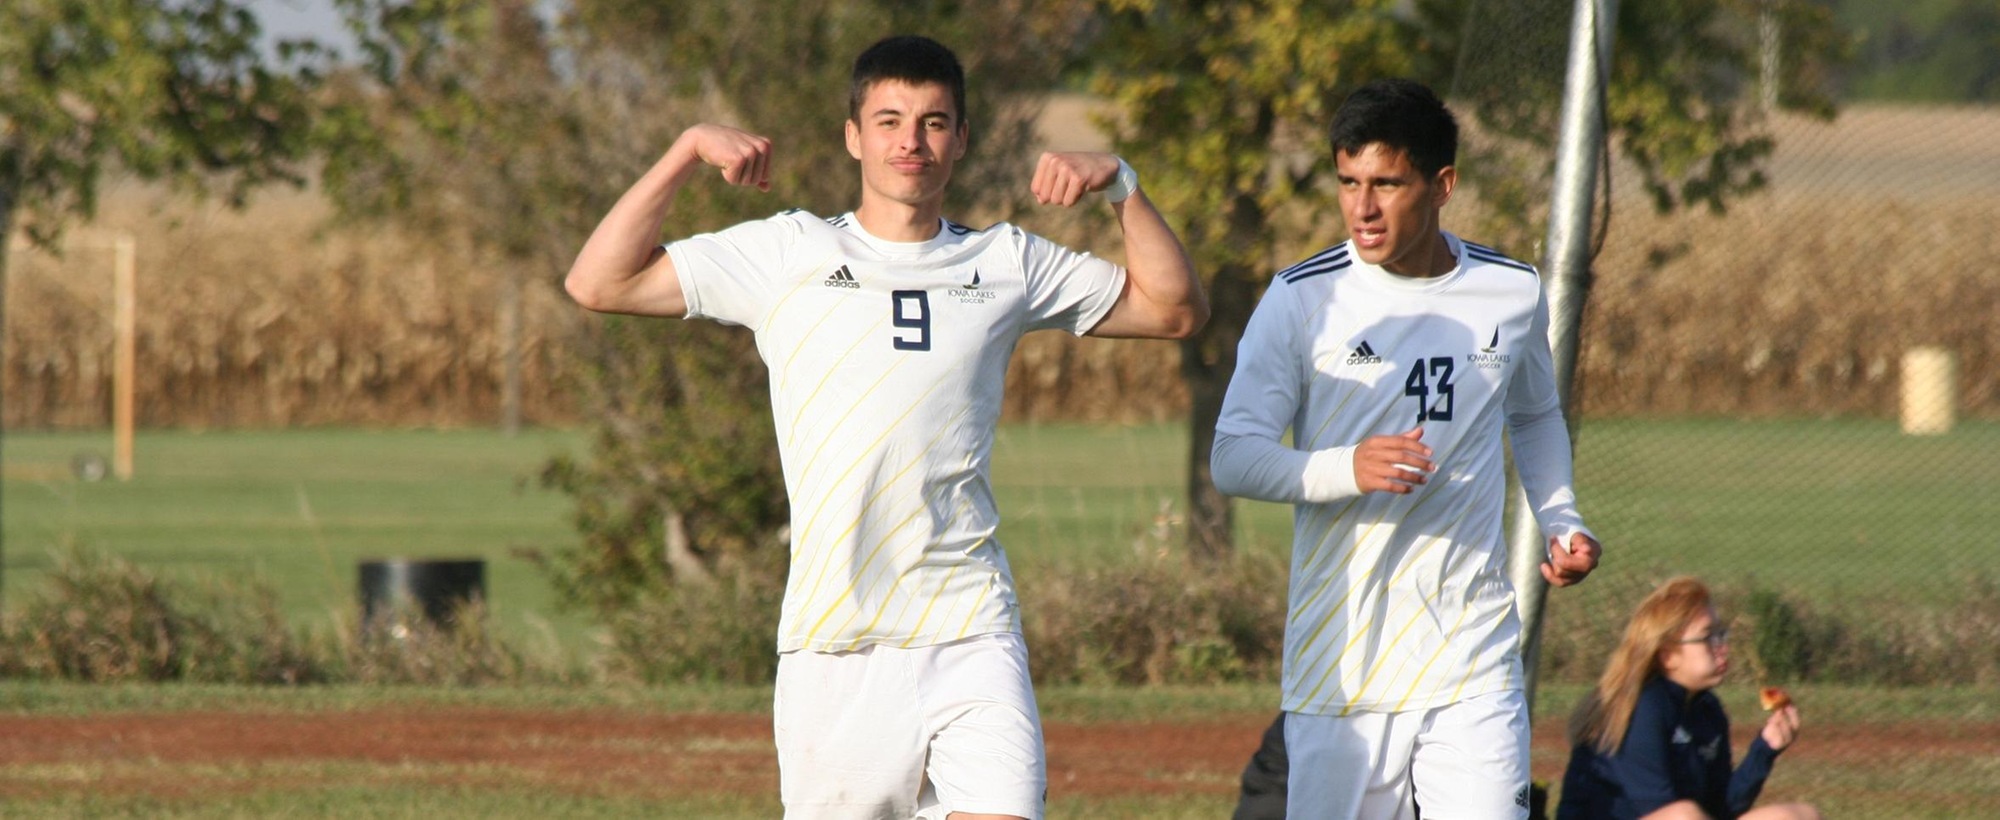 Lakers Dazzle in 6-0 Win Over NIACC